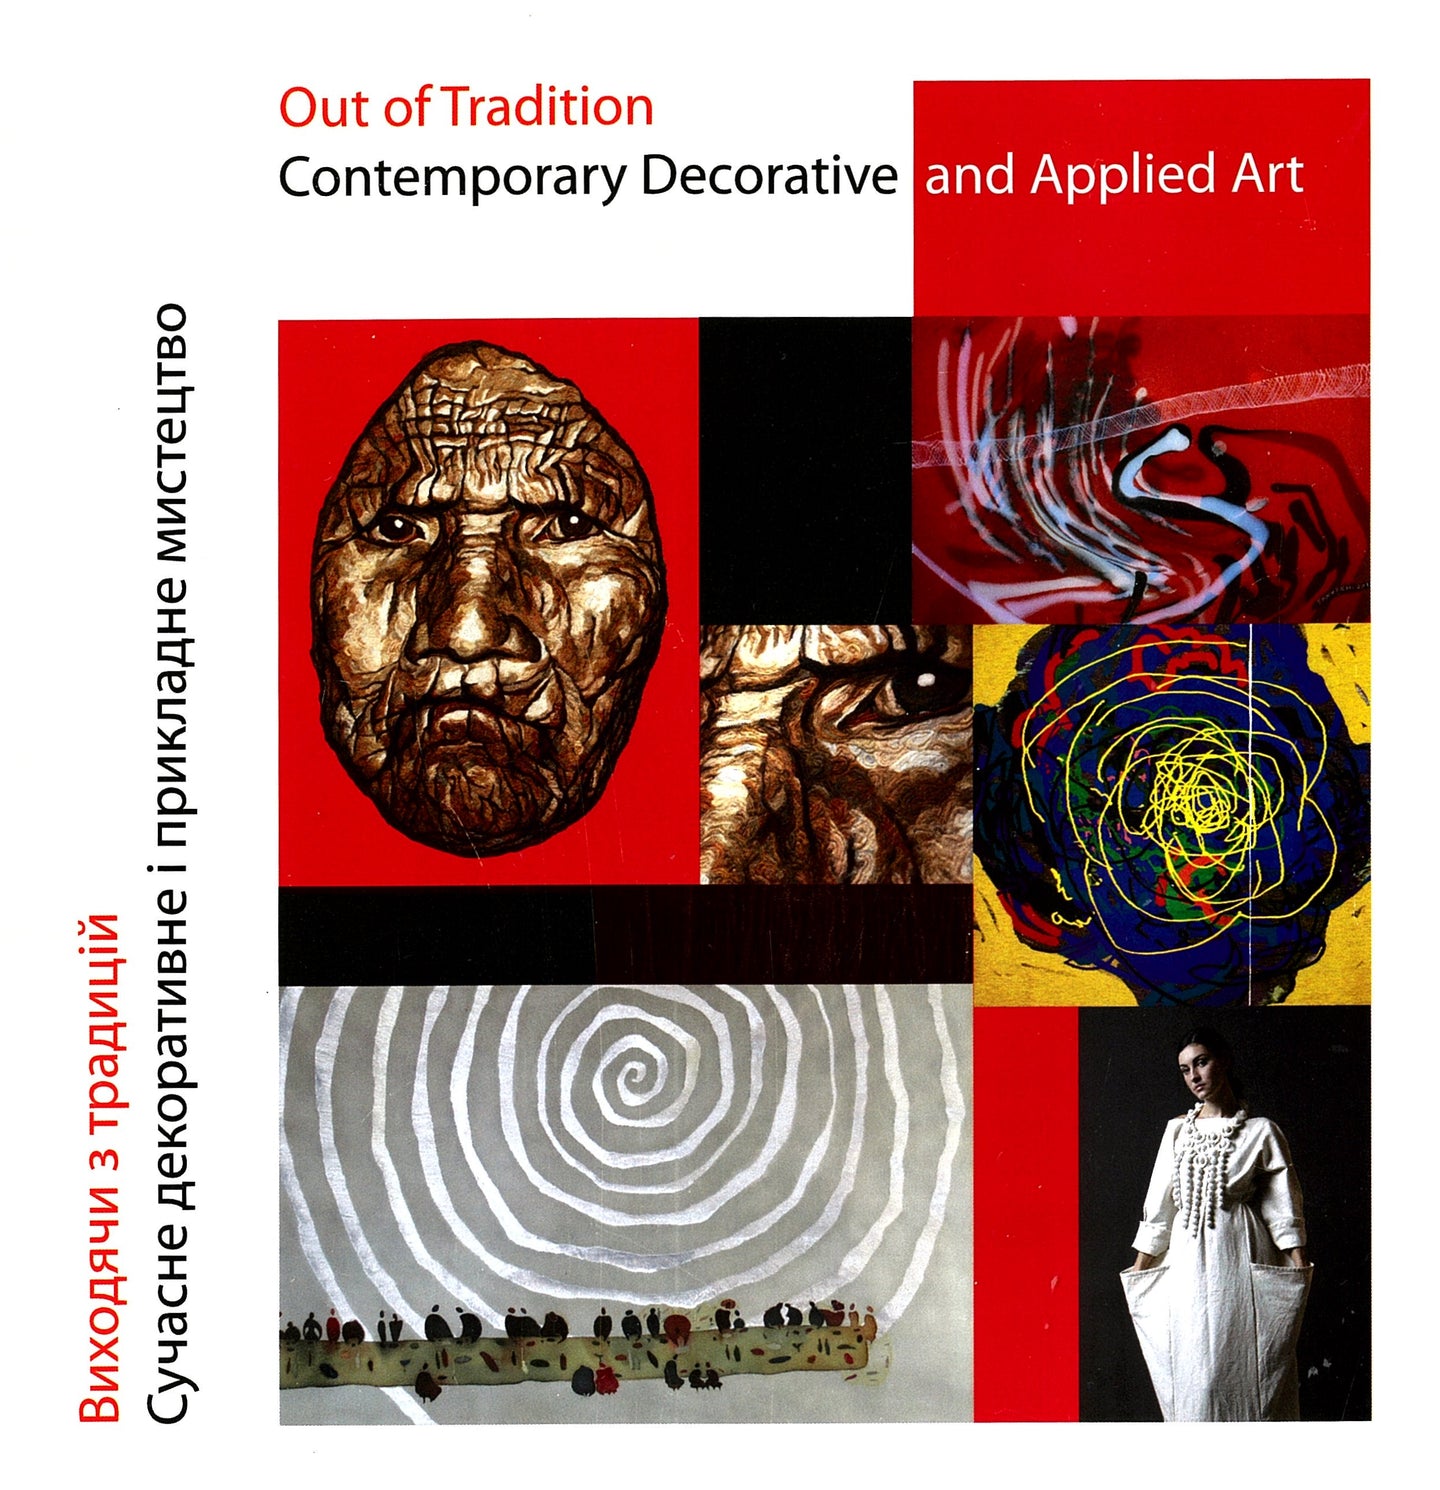 Out of Tradition: Contemporary Decorative and Applied Art